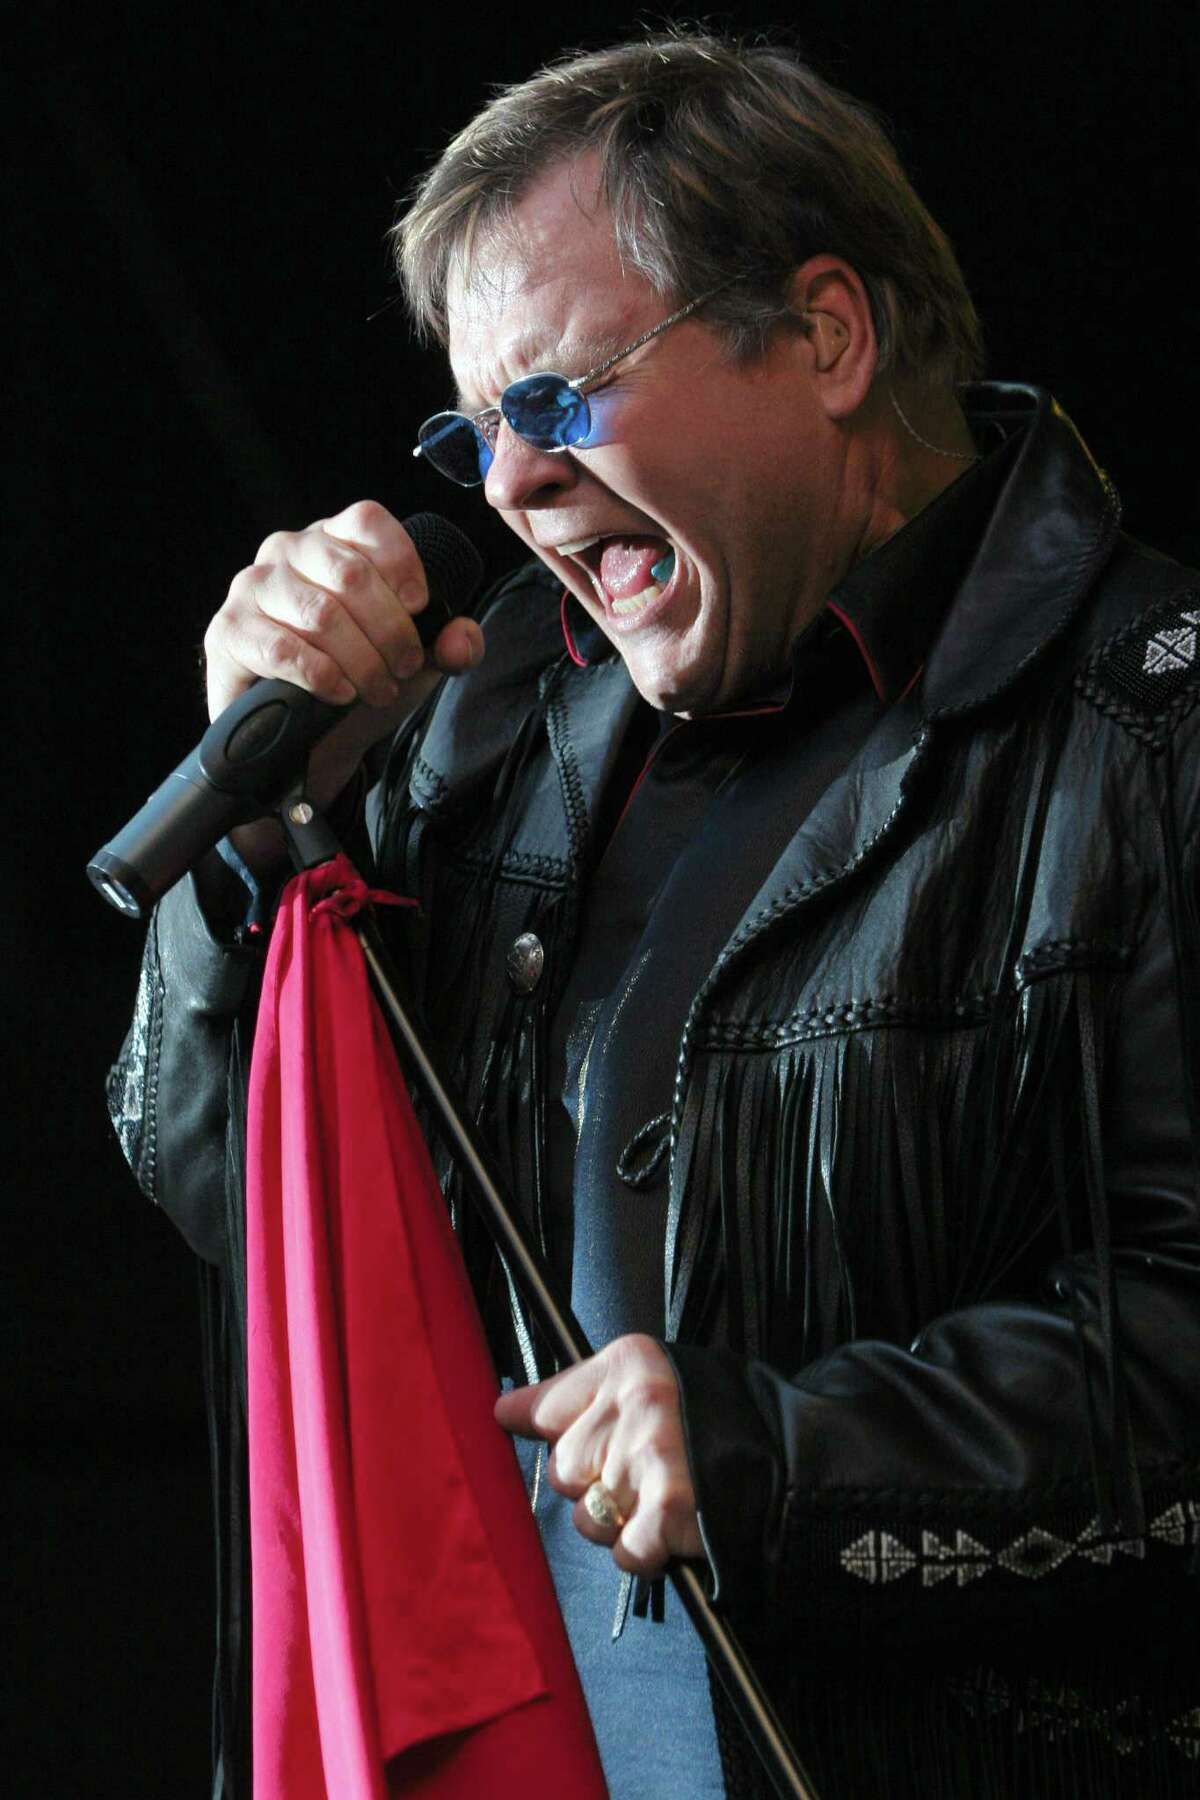 Meat Loaf mined power ballad motifs to land several hits, including the timeless "Paradise by the Dashboard Light."